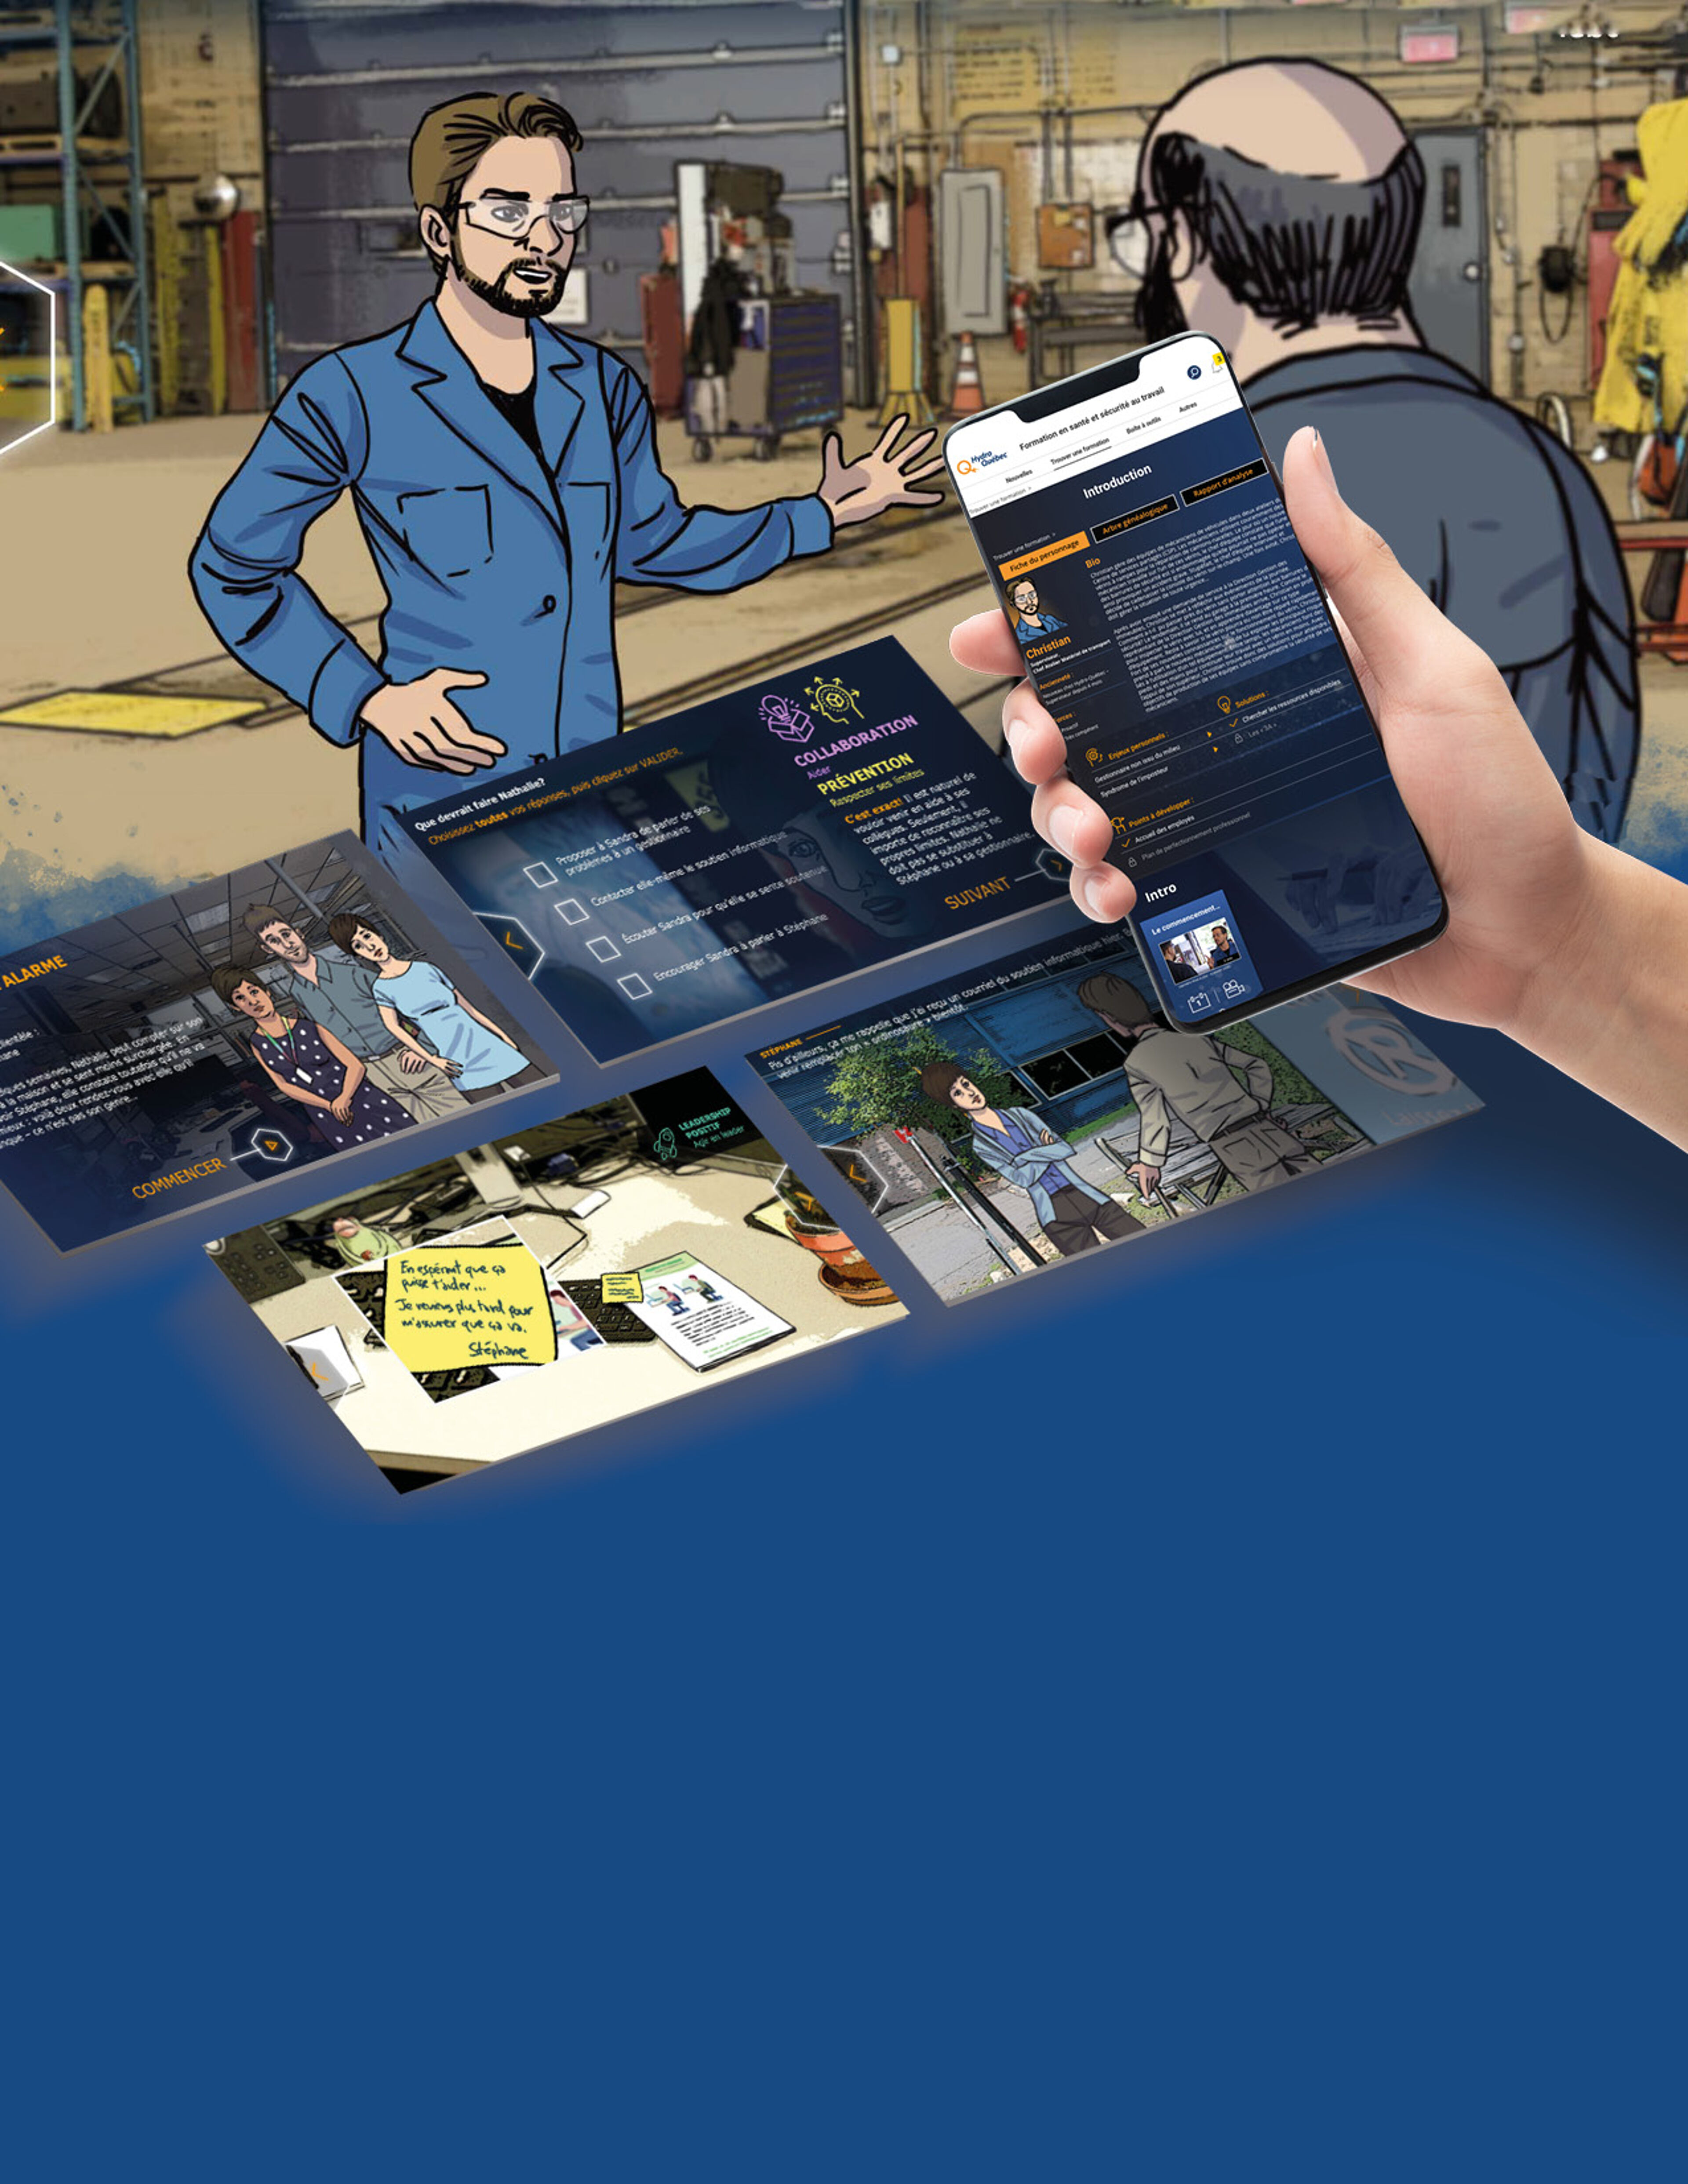 A hand holding a smartphone displaying a training simulation in an industrial setting.